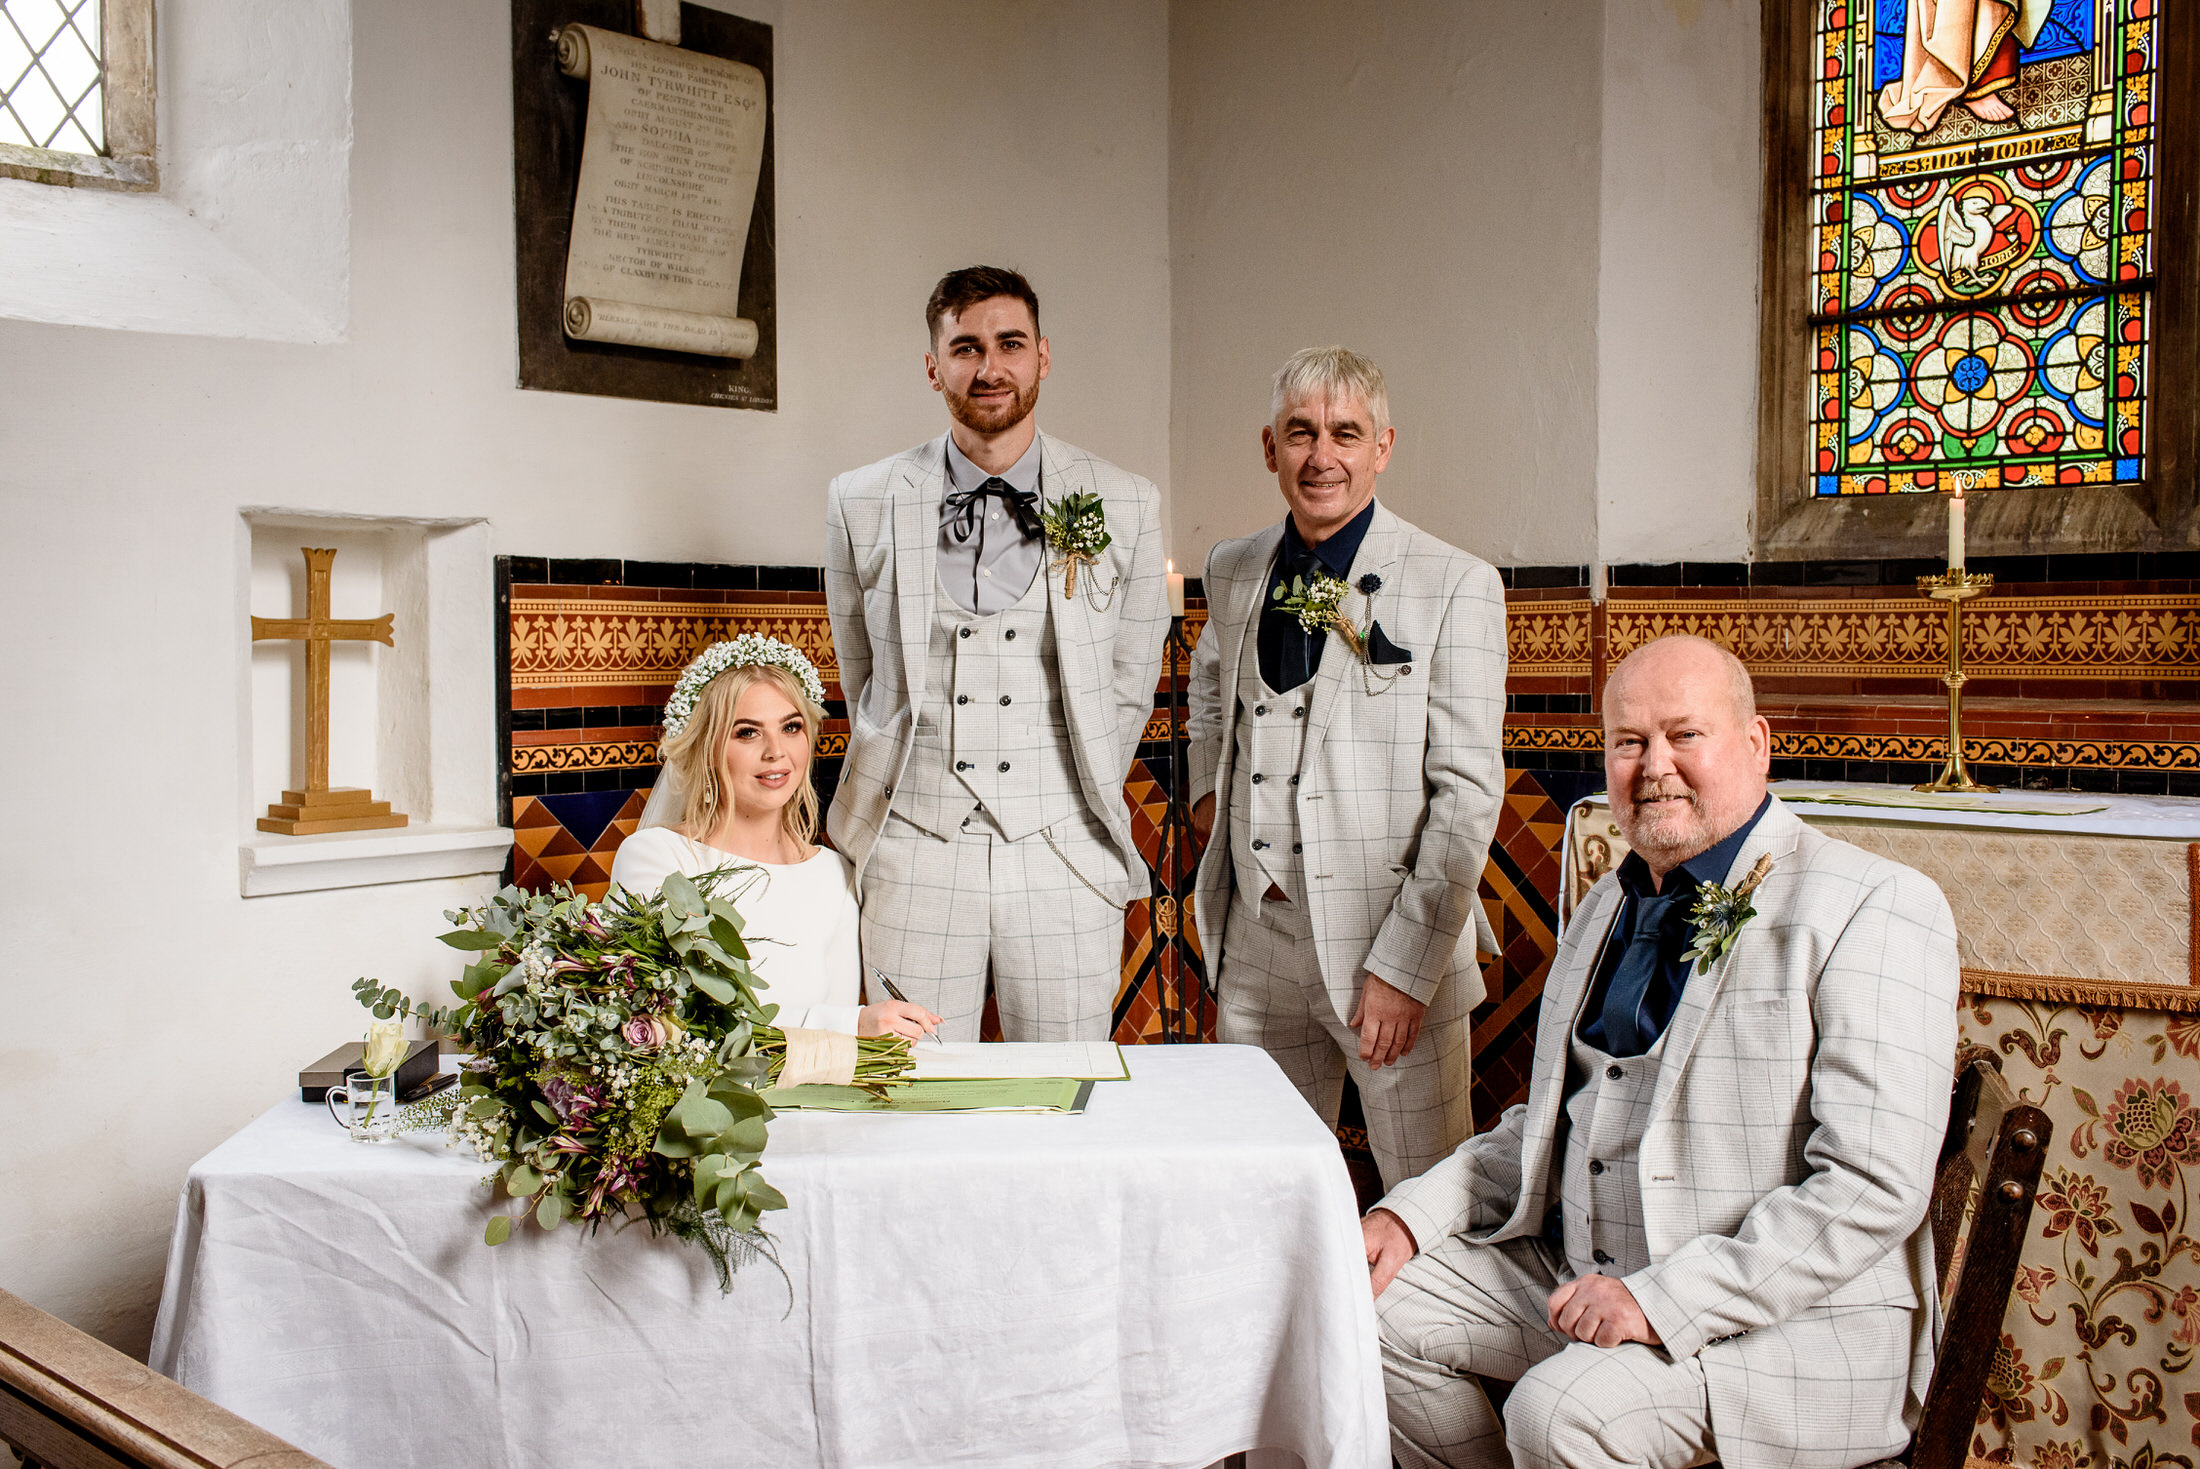 A scrivelsby walled garden wedding party poses for a picture in a church.